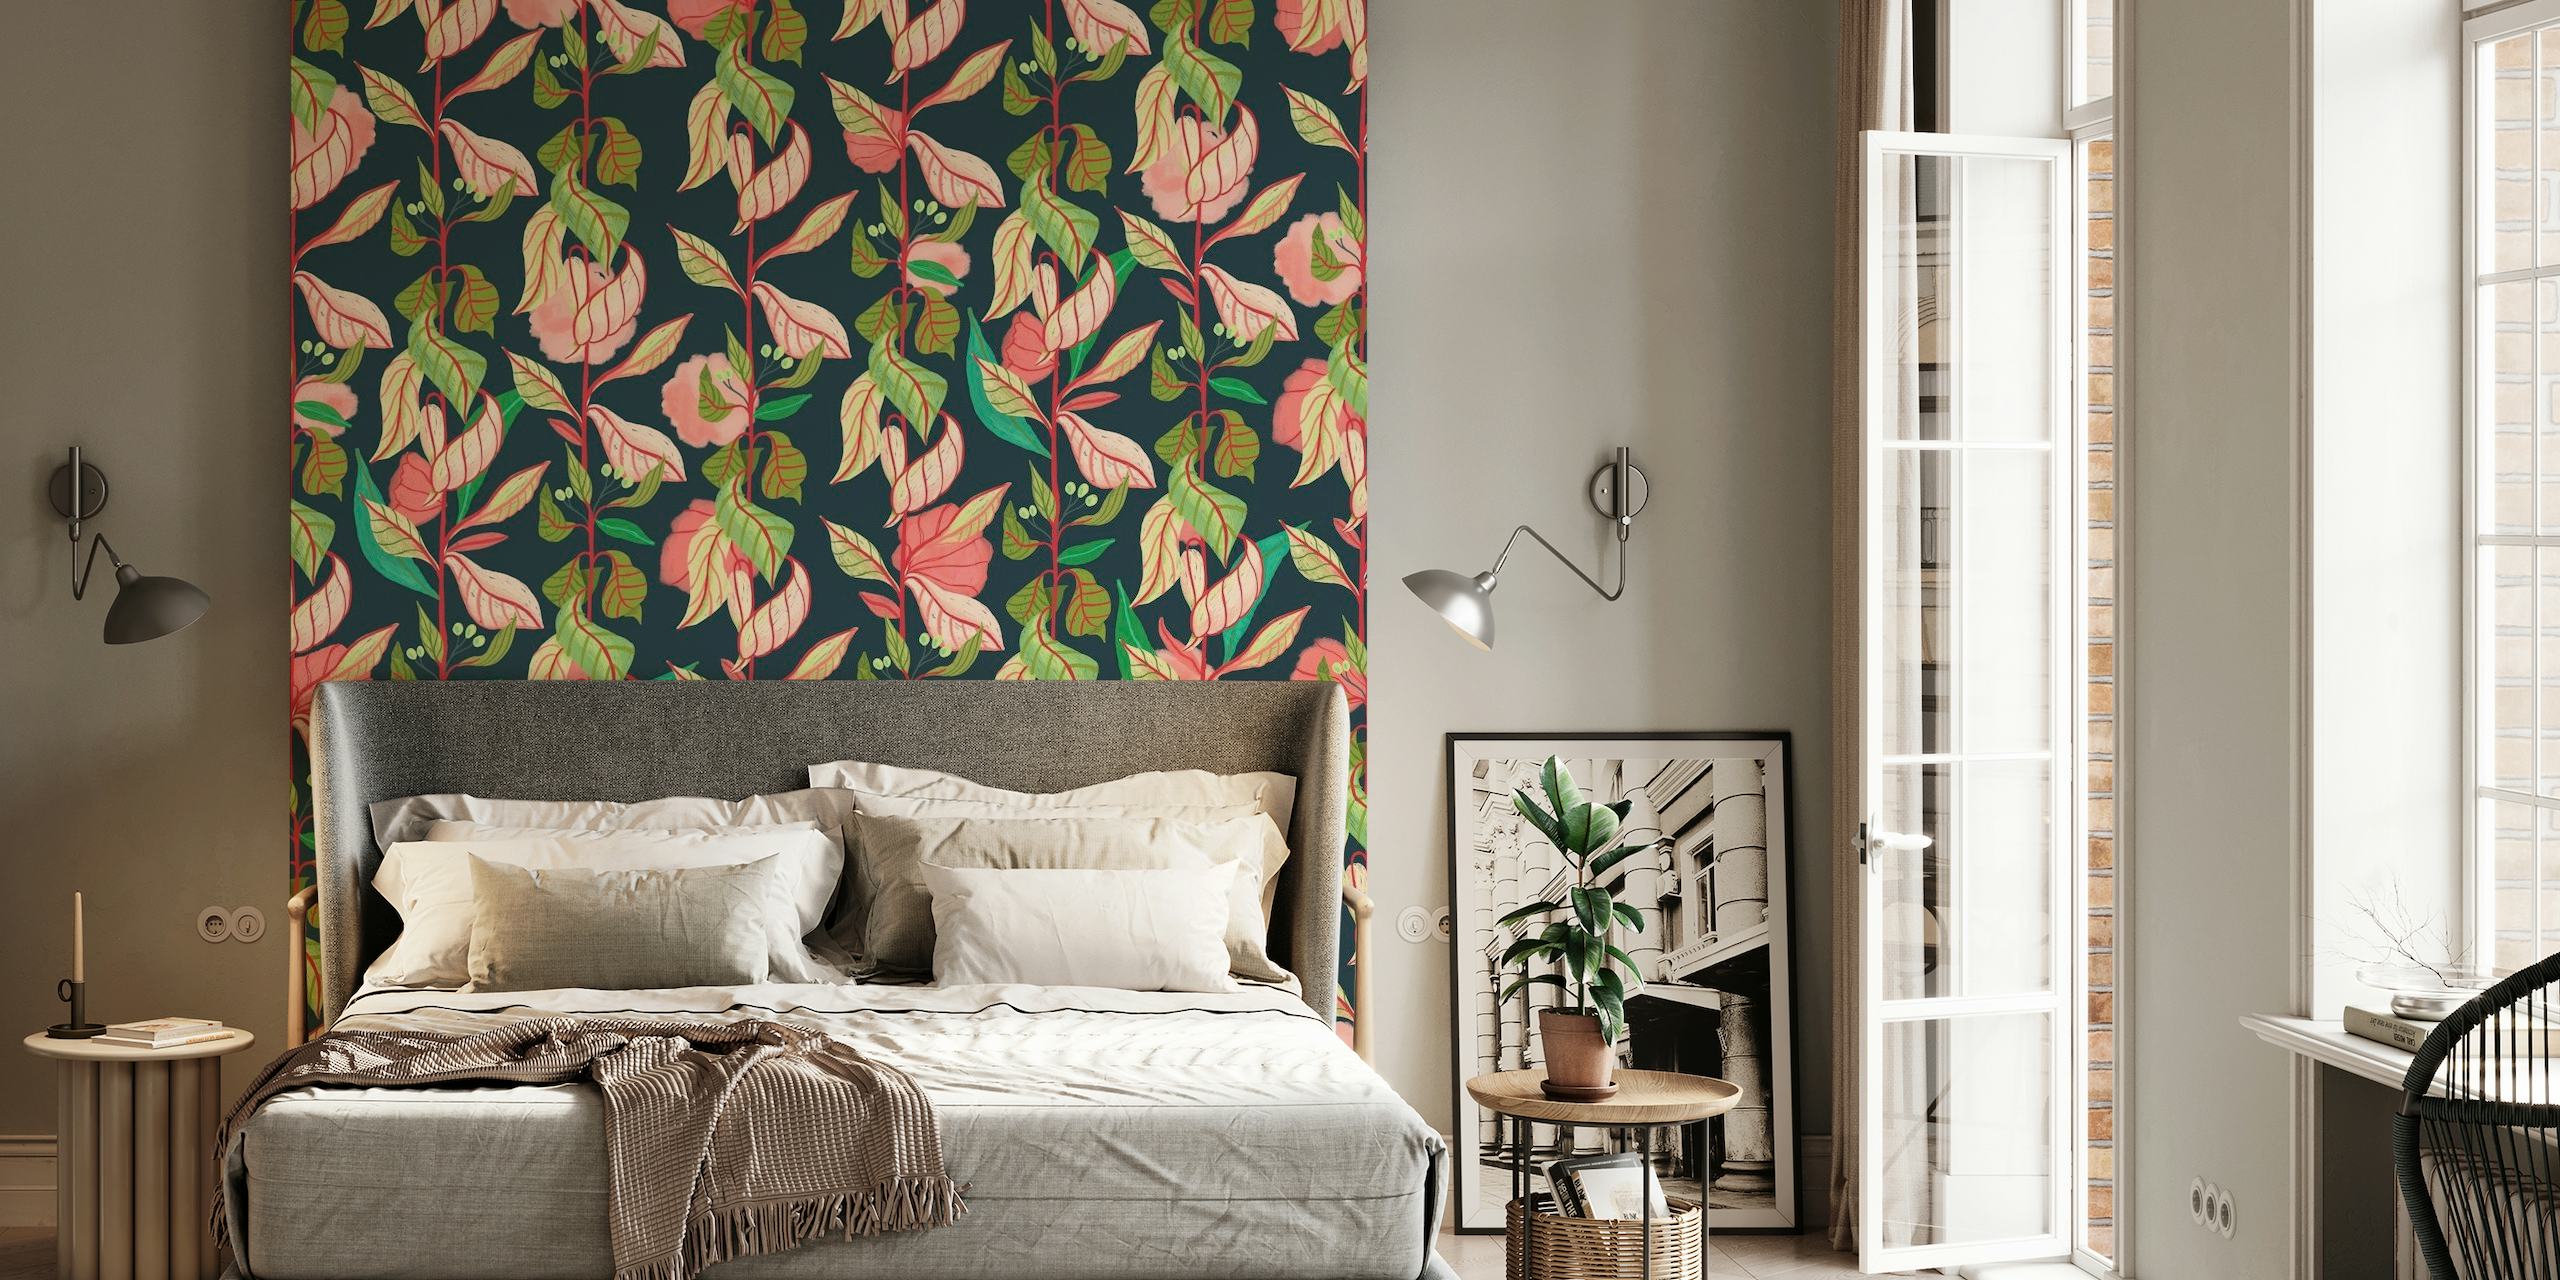 Floral river walk themed wall mural with pink and green tones